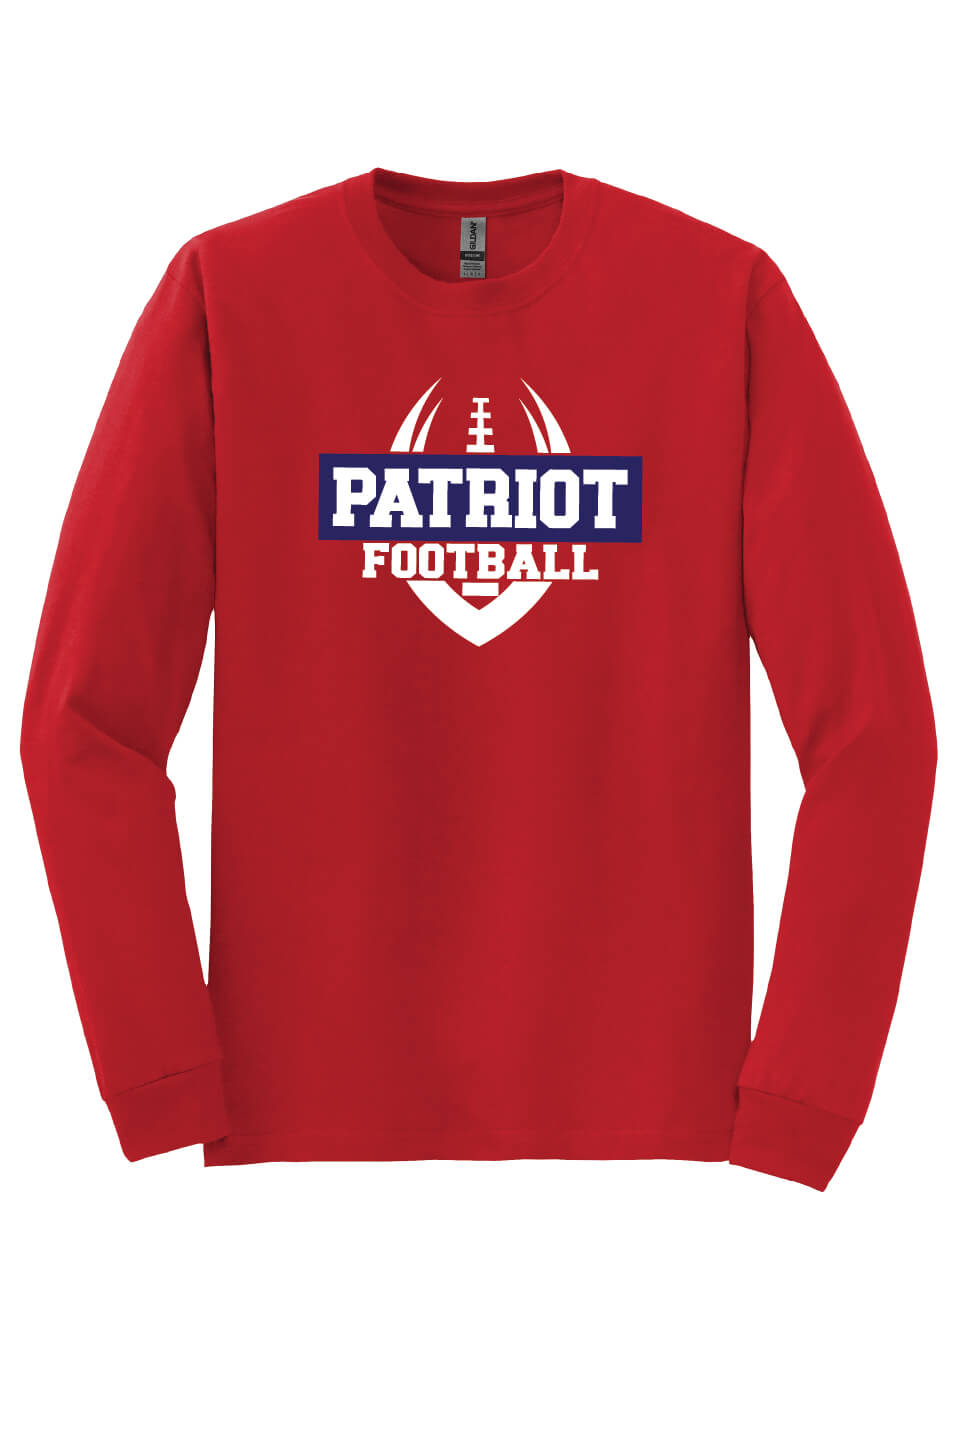 Patriot Football Long Sleeve T-shirts (Youth) red